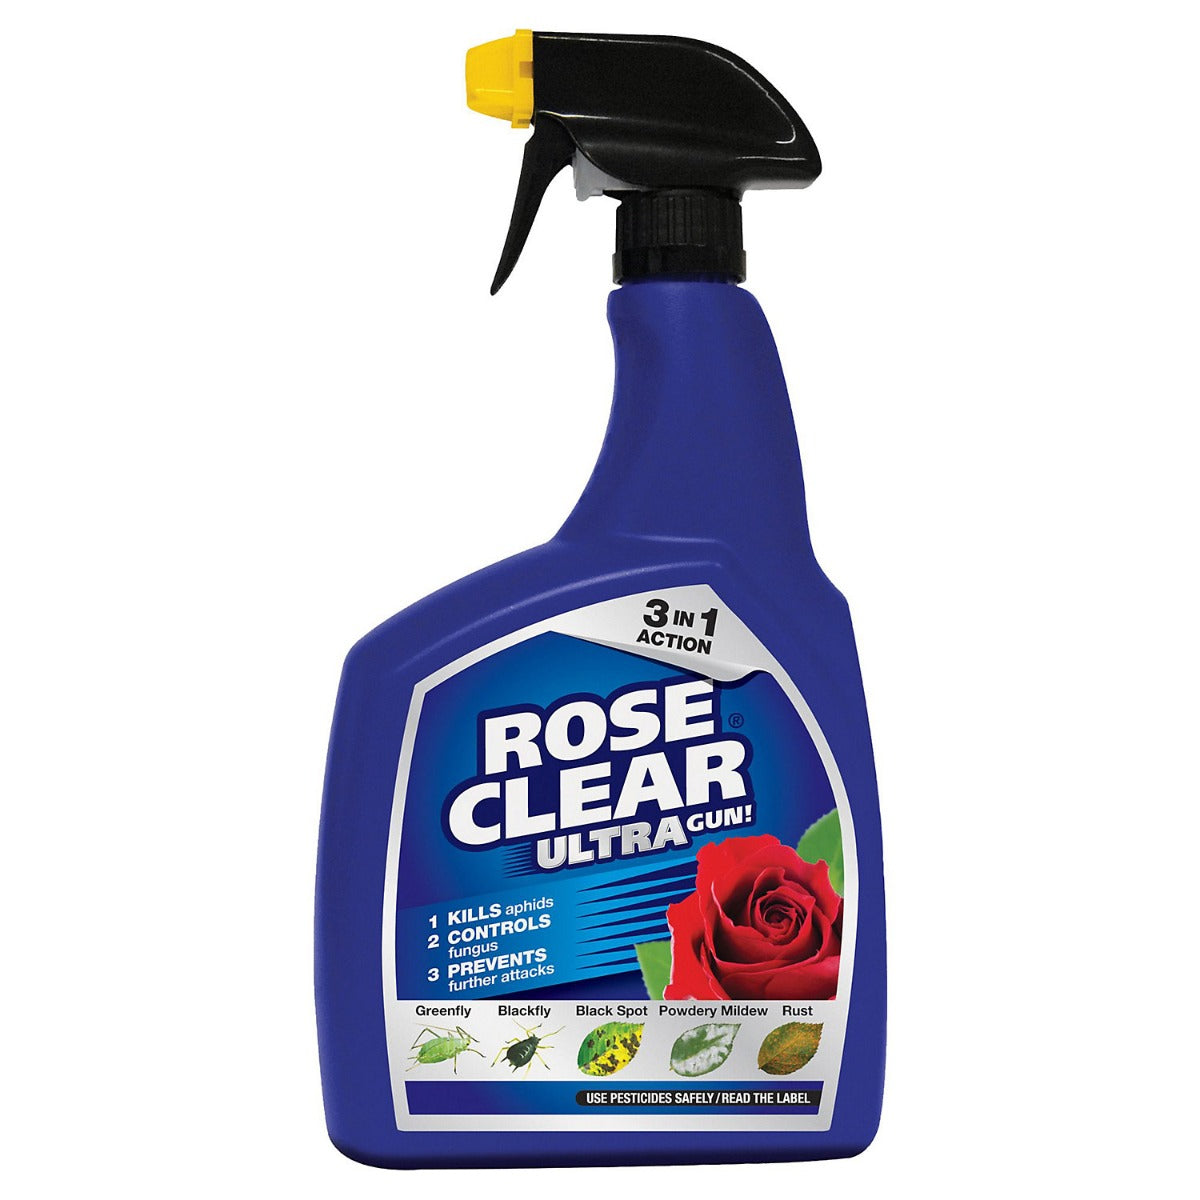 RoseClear Ultra Gun Insecticide & Fungicide Spray 1L